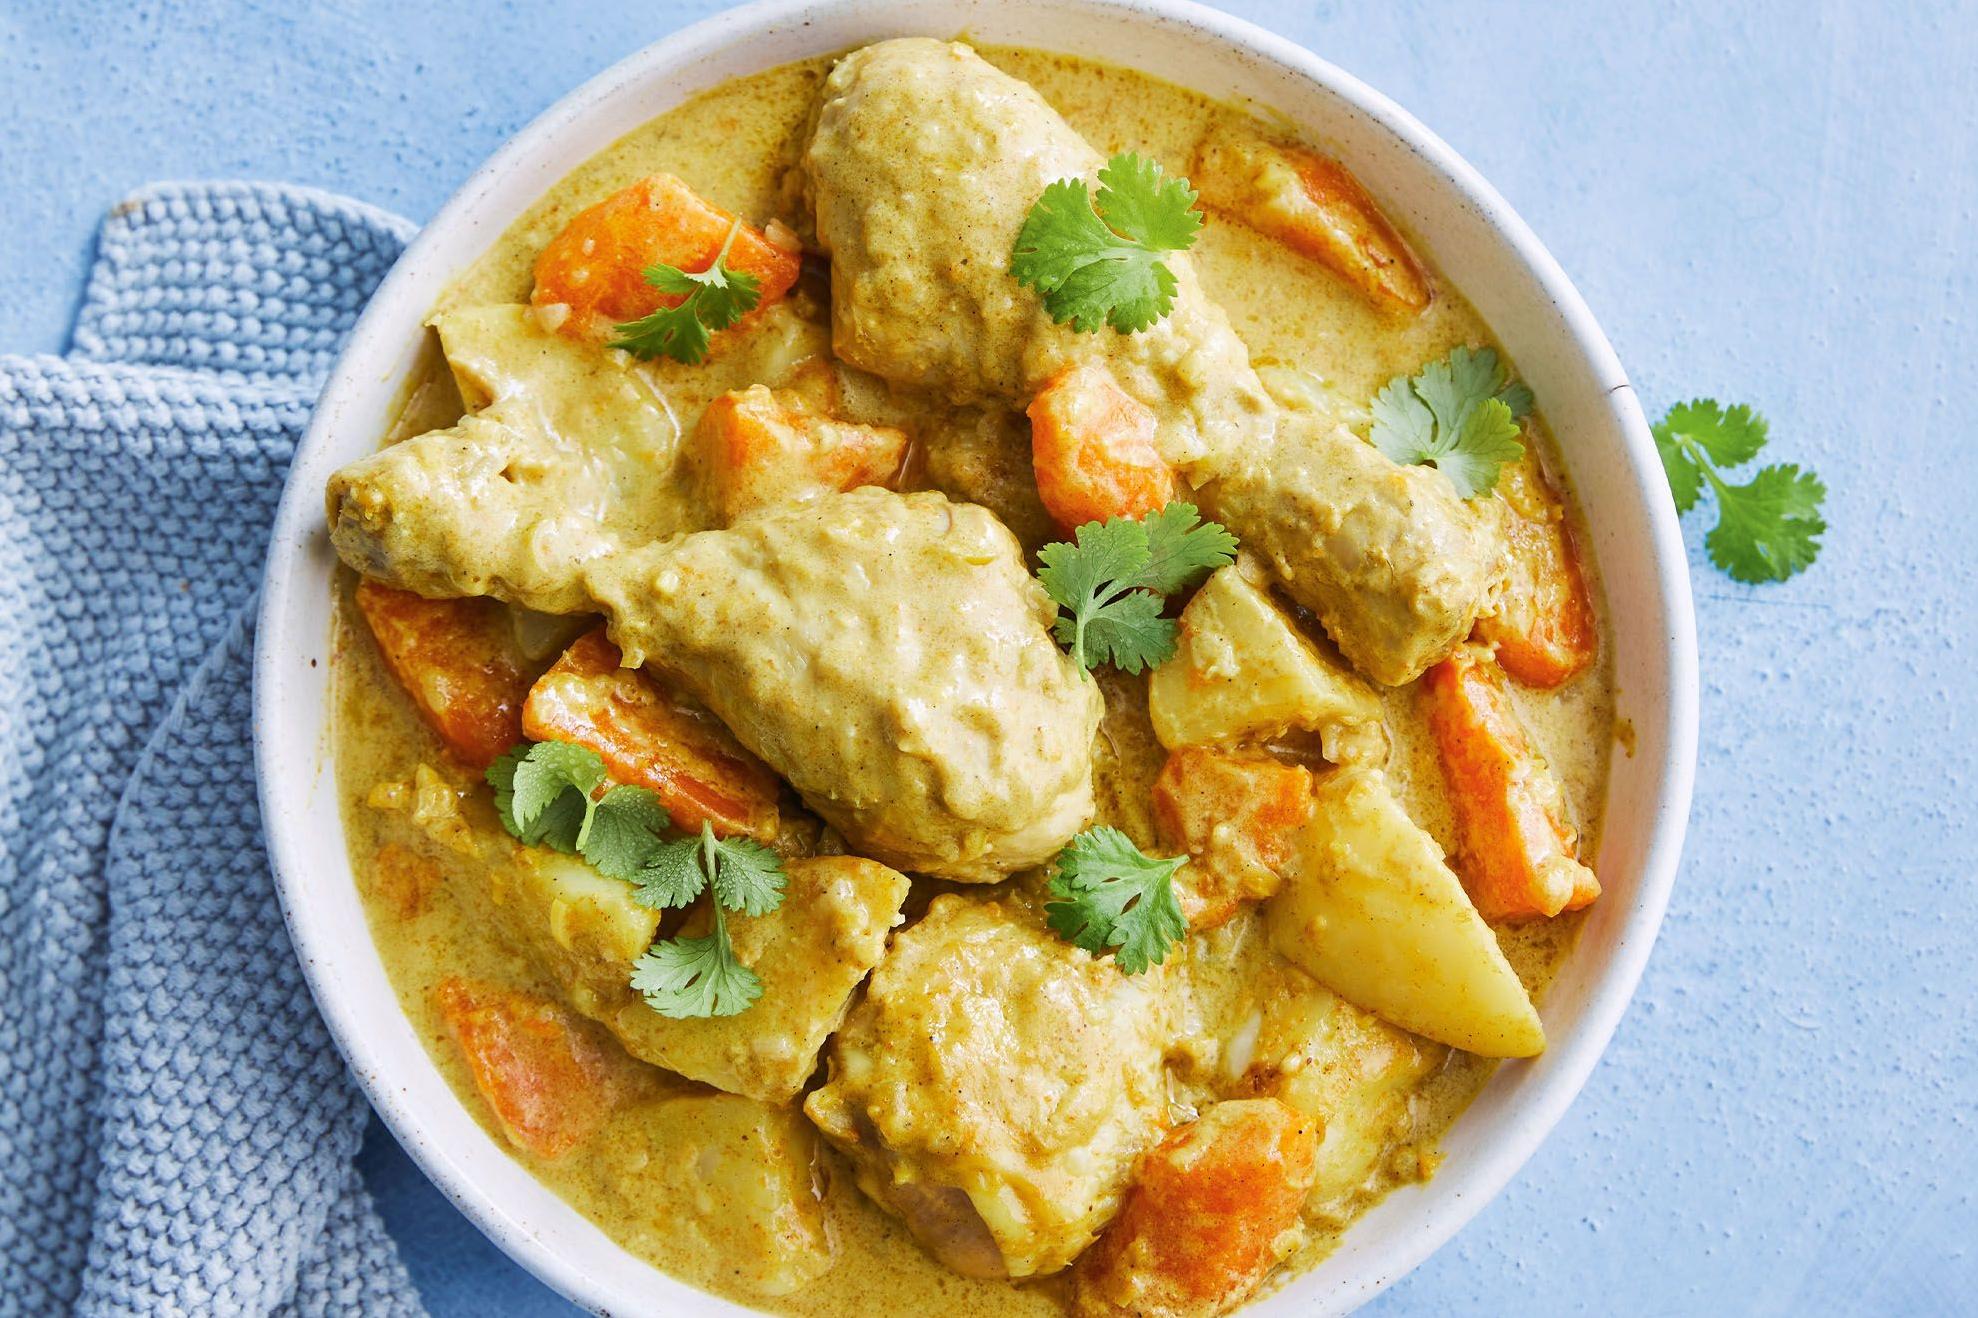  This creamy and aromatic Vietnamese chicken curry is the ultimate comfort food!